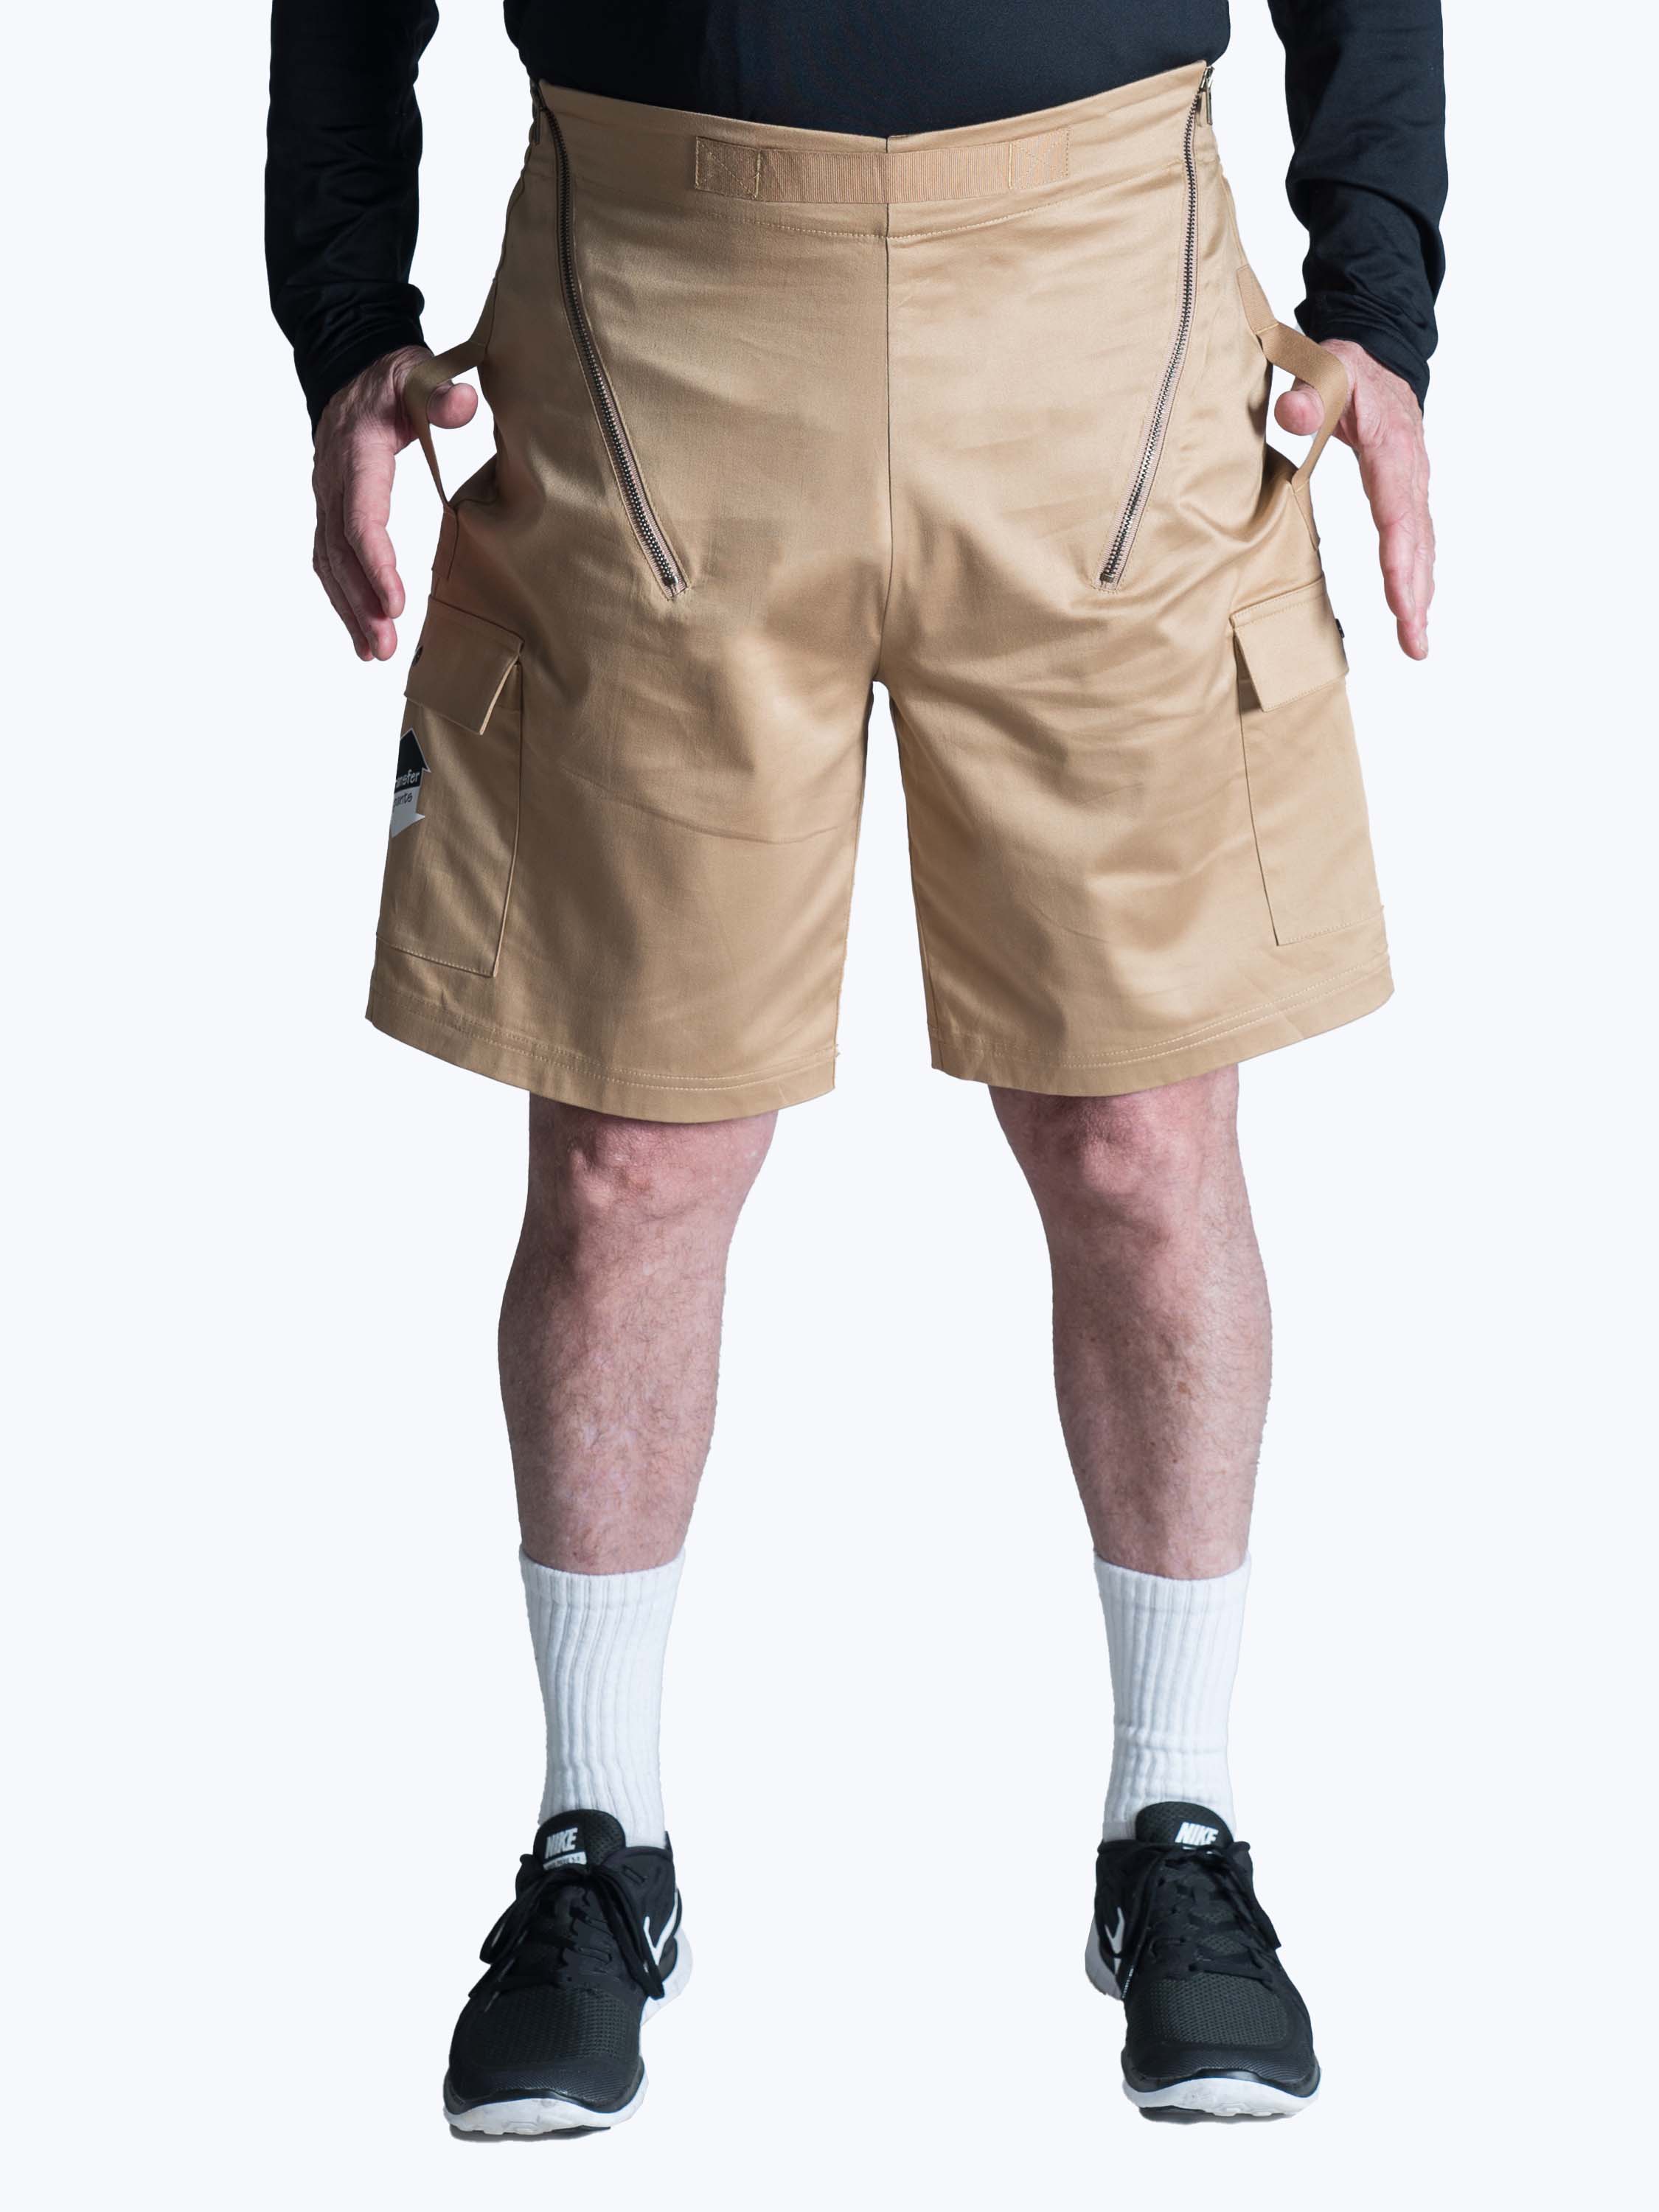 Transfer Pants Cargo Shorts (For Disabled and Wheelchair Patients)